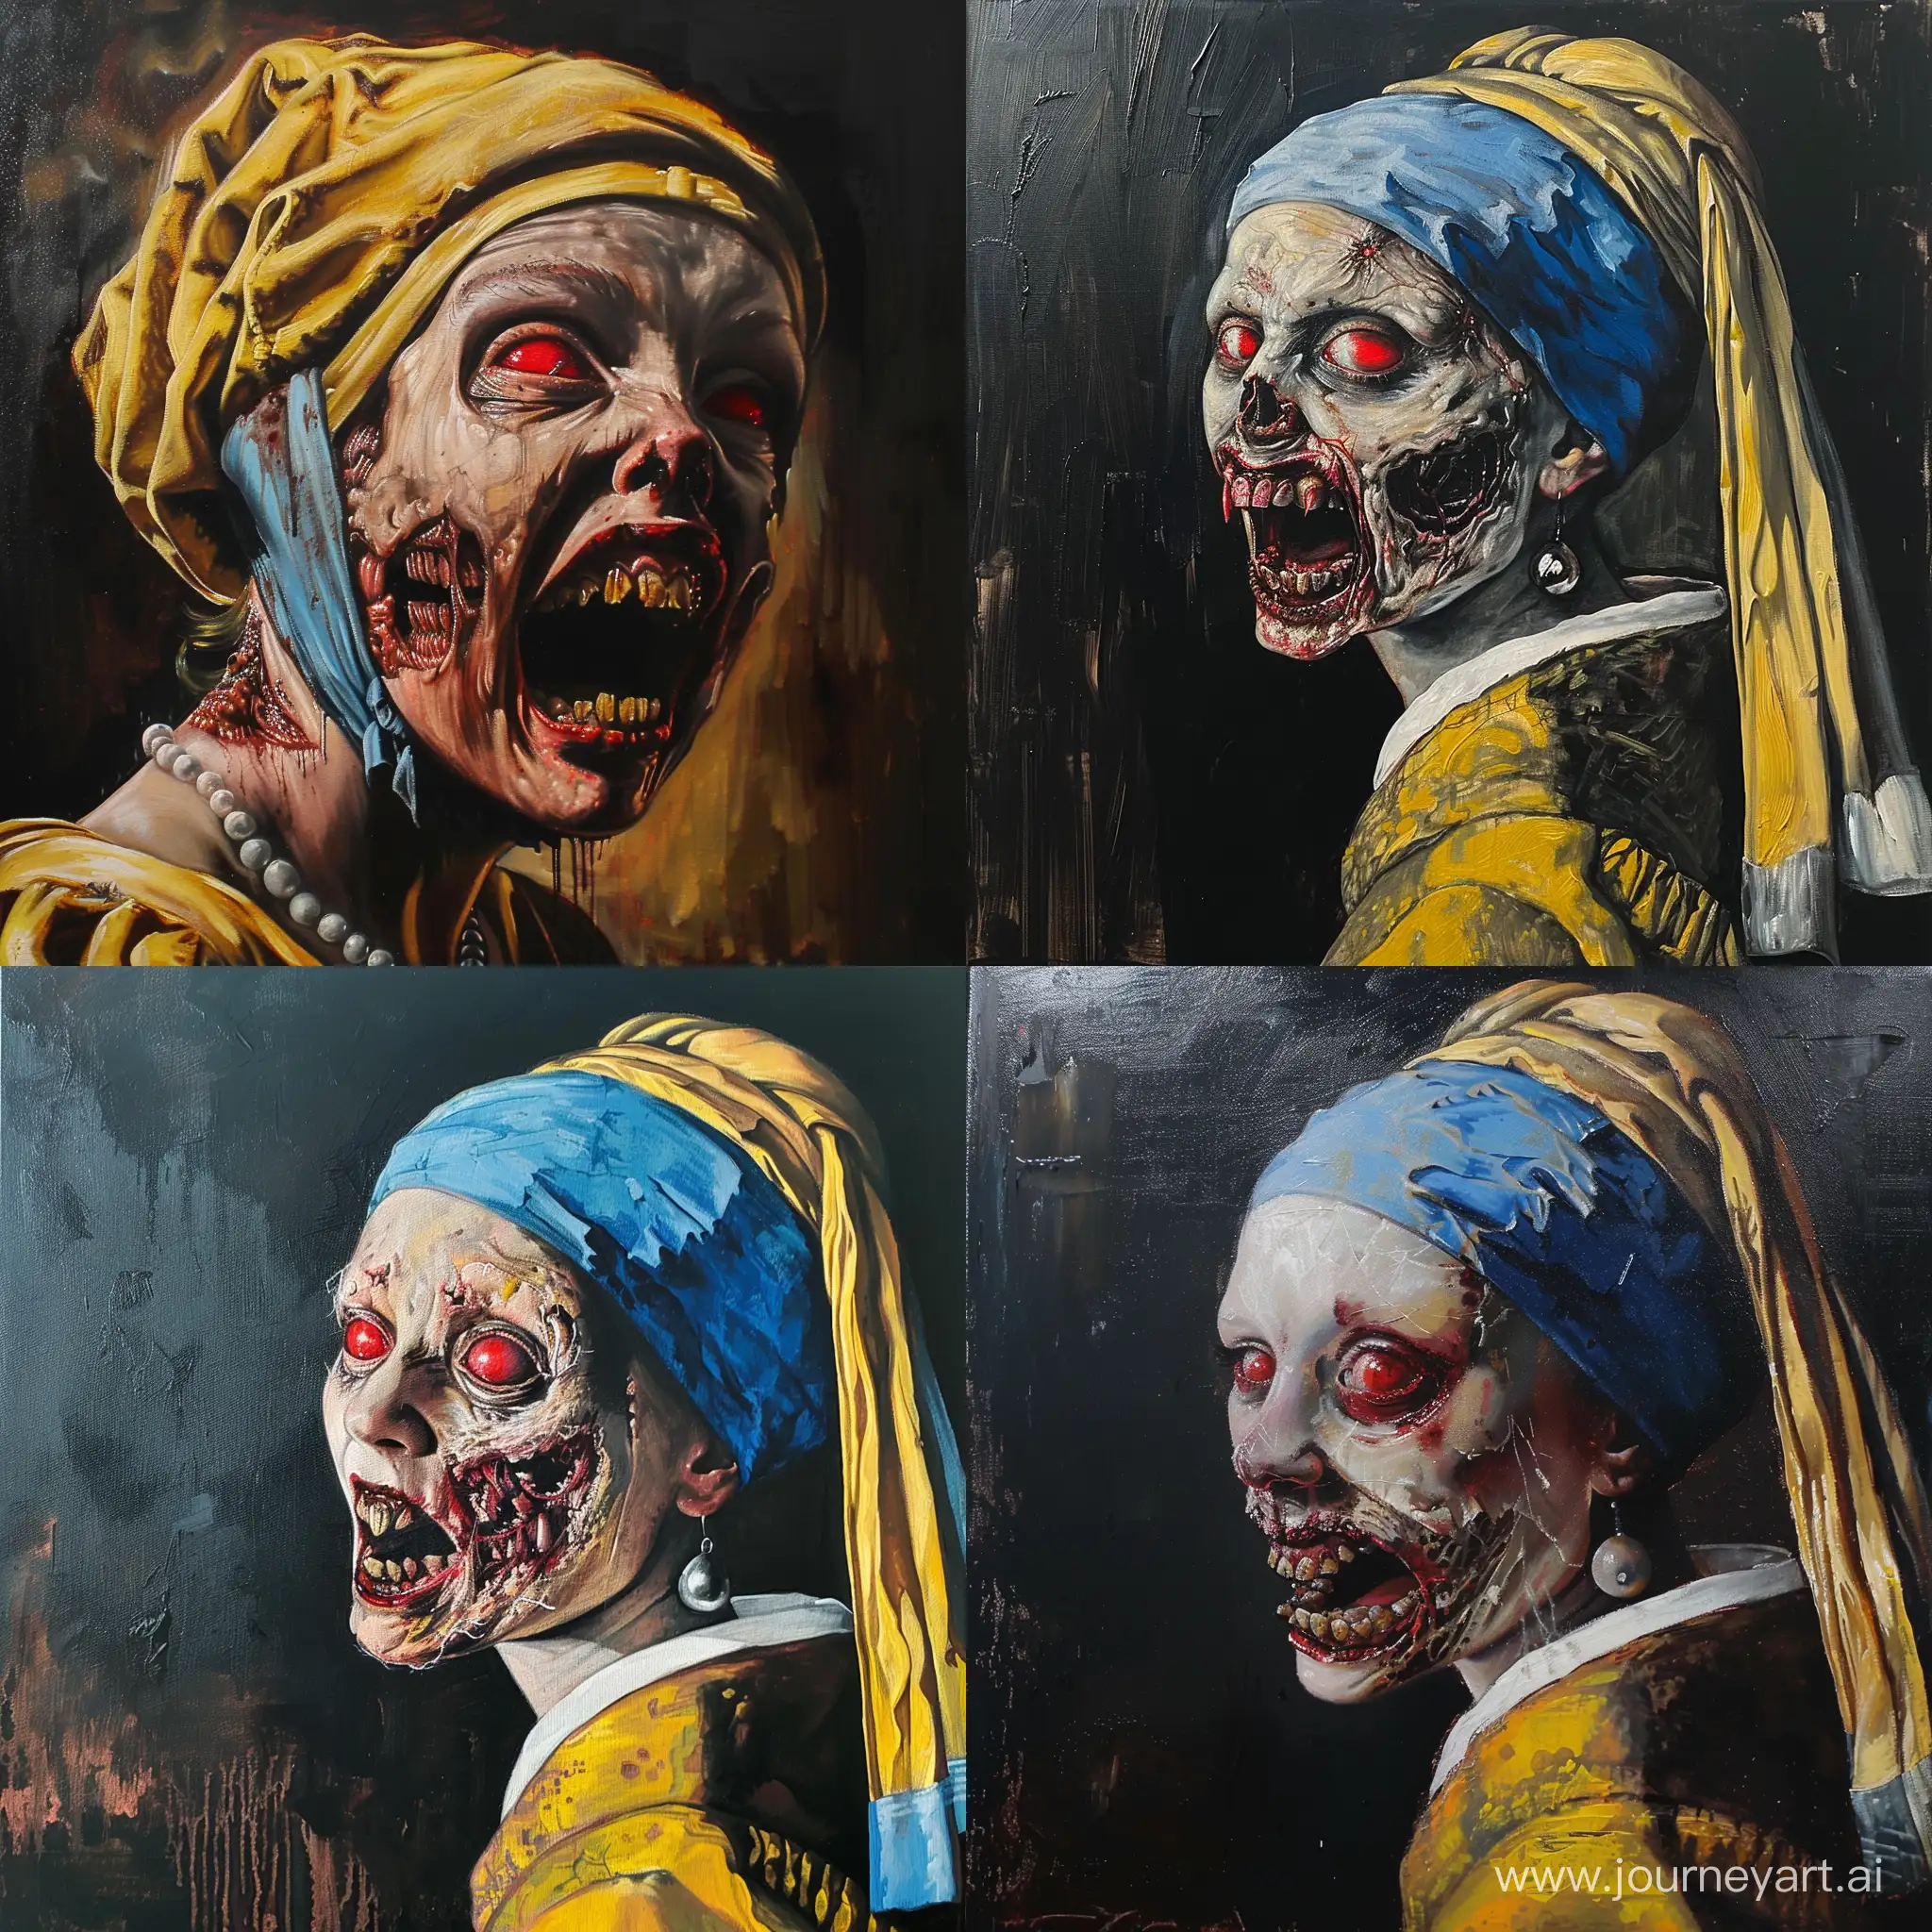 Creepy version of 'Girl with a Pearl Earring'. The woman has distorted rotten face and red eyes. Sharp and informal teeth. Screaming. Dark oil painting.